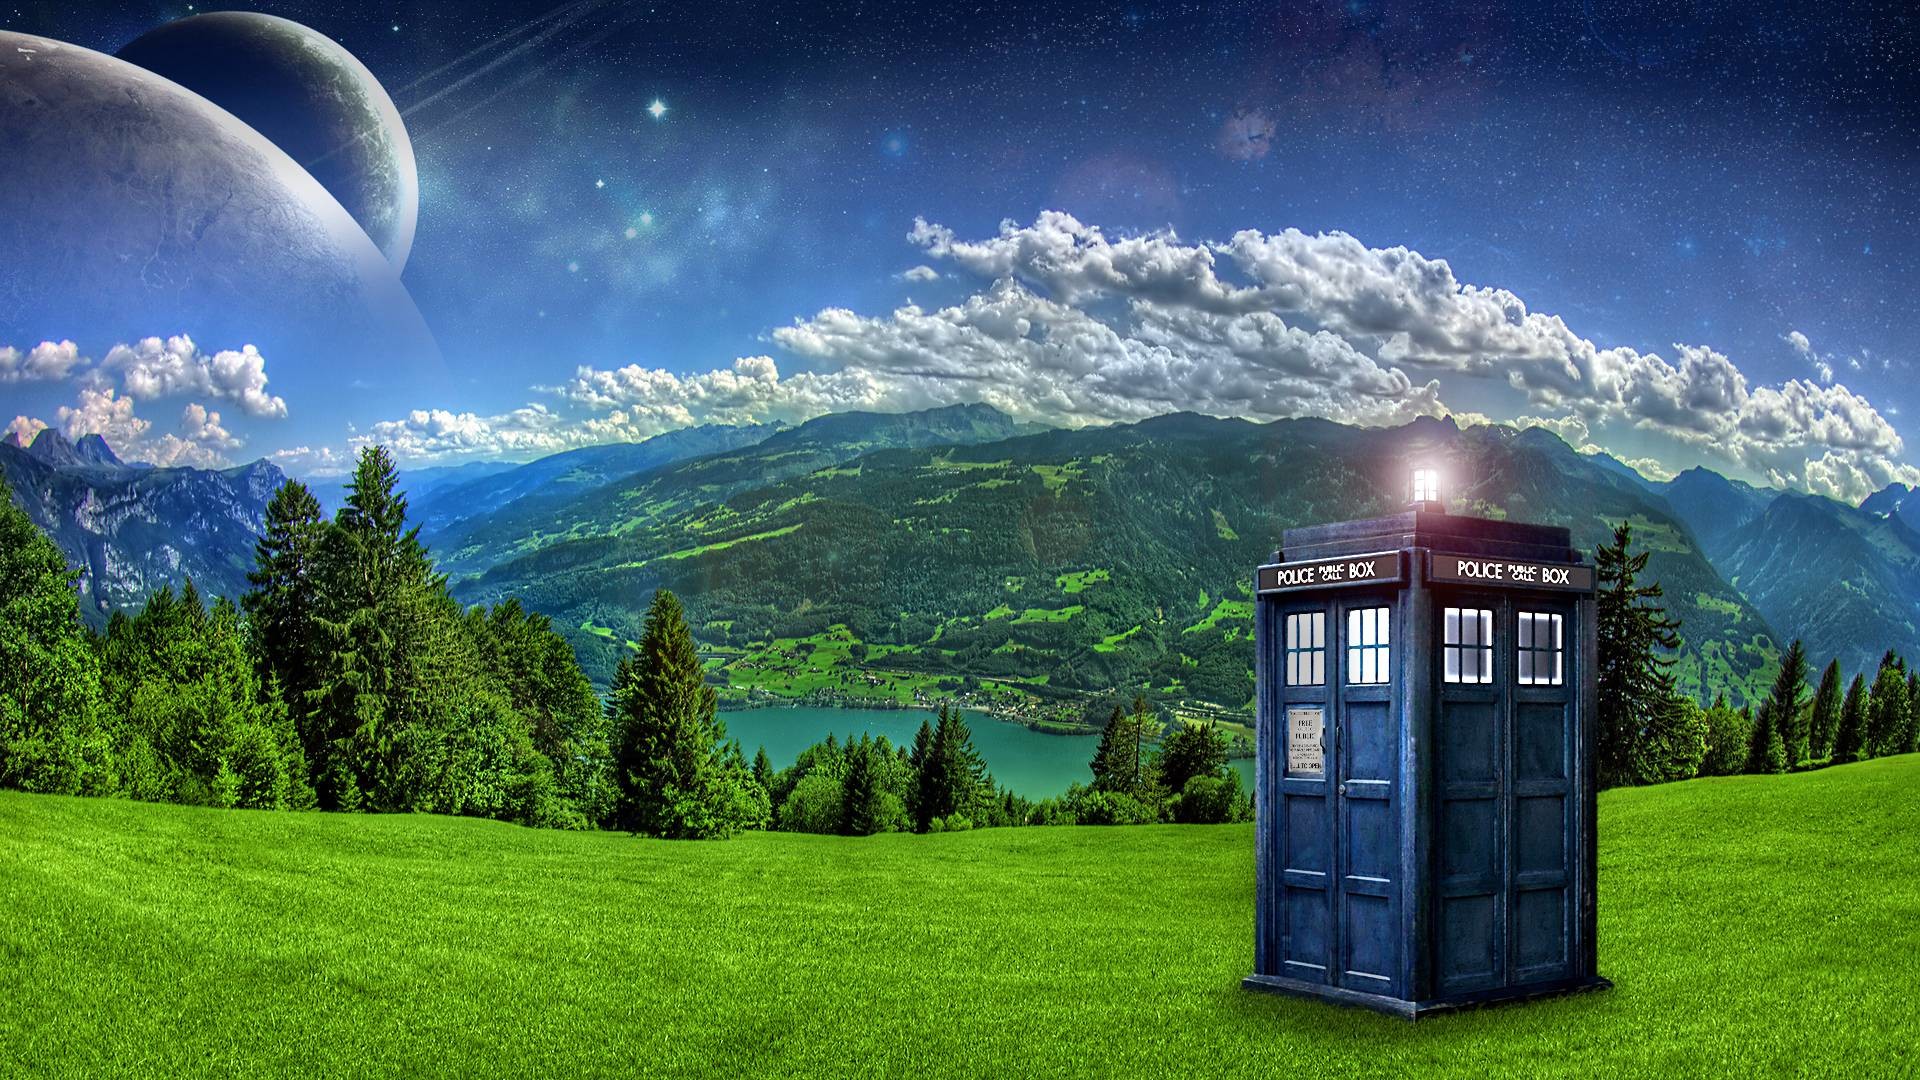 1920x1080 Wallpapers For > Doctor Who Wallpapers Tardis